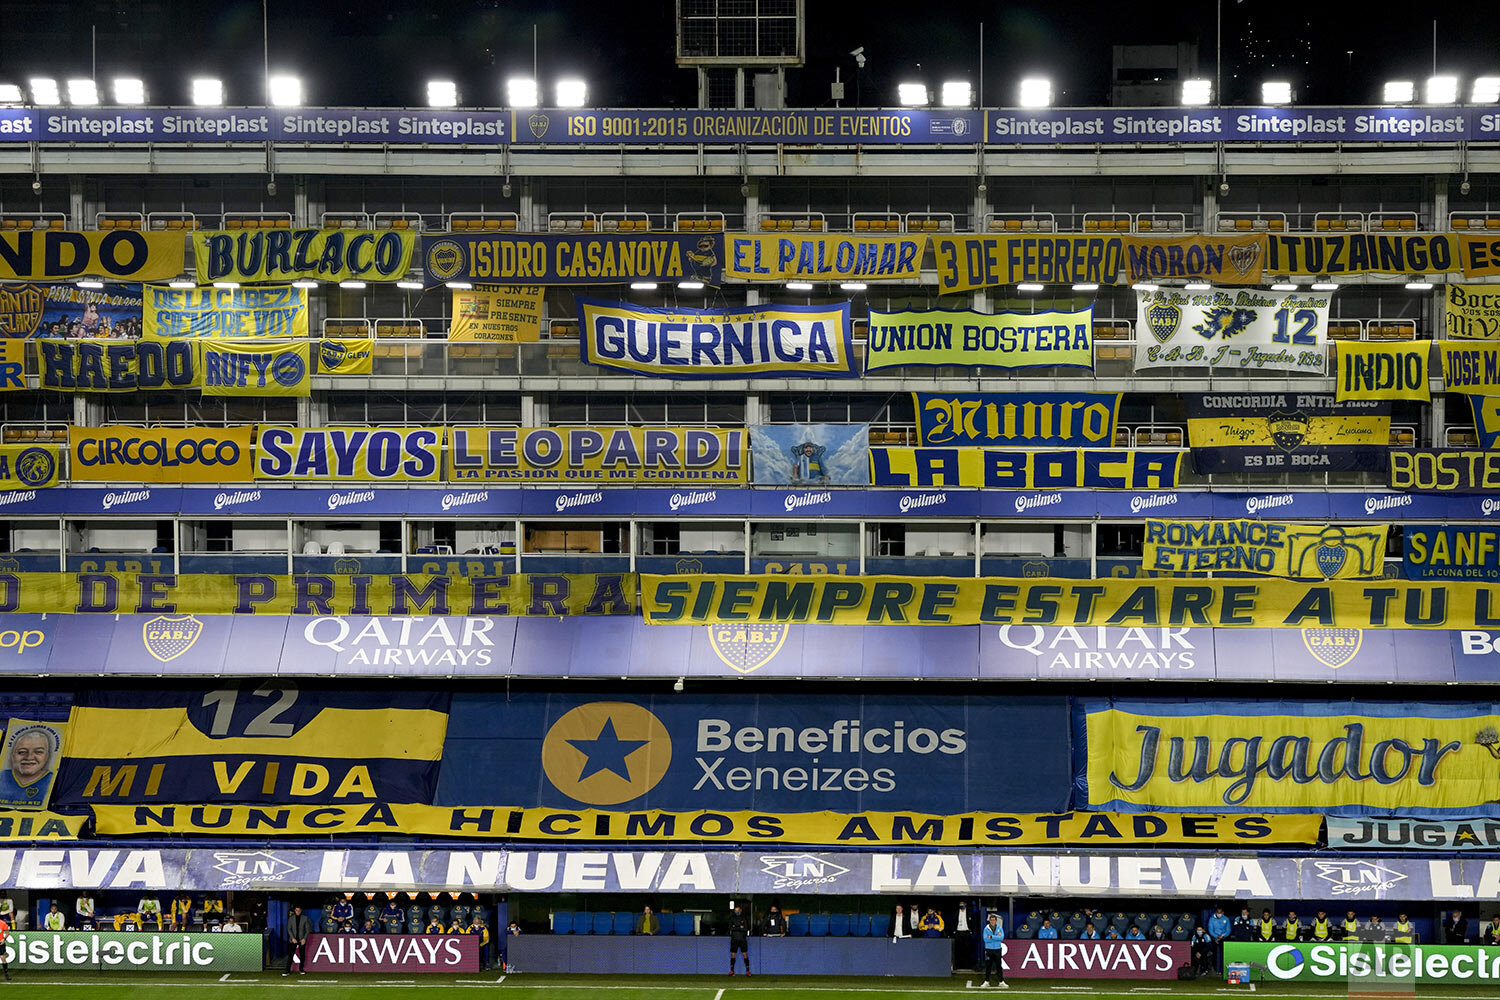  Banners placed by fans fill the empty stands of Bombonera stadium during a soccer match between Boca Juniors and Racing Club in Buenos Aires, Argentina, Aug. 30, 2021. (AP Photo/Natacha Pisarenko) 